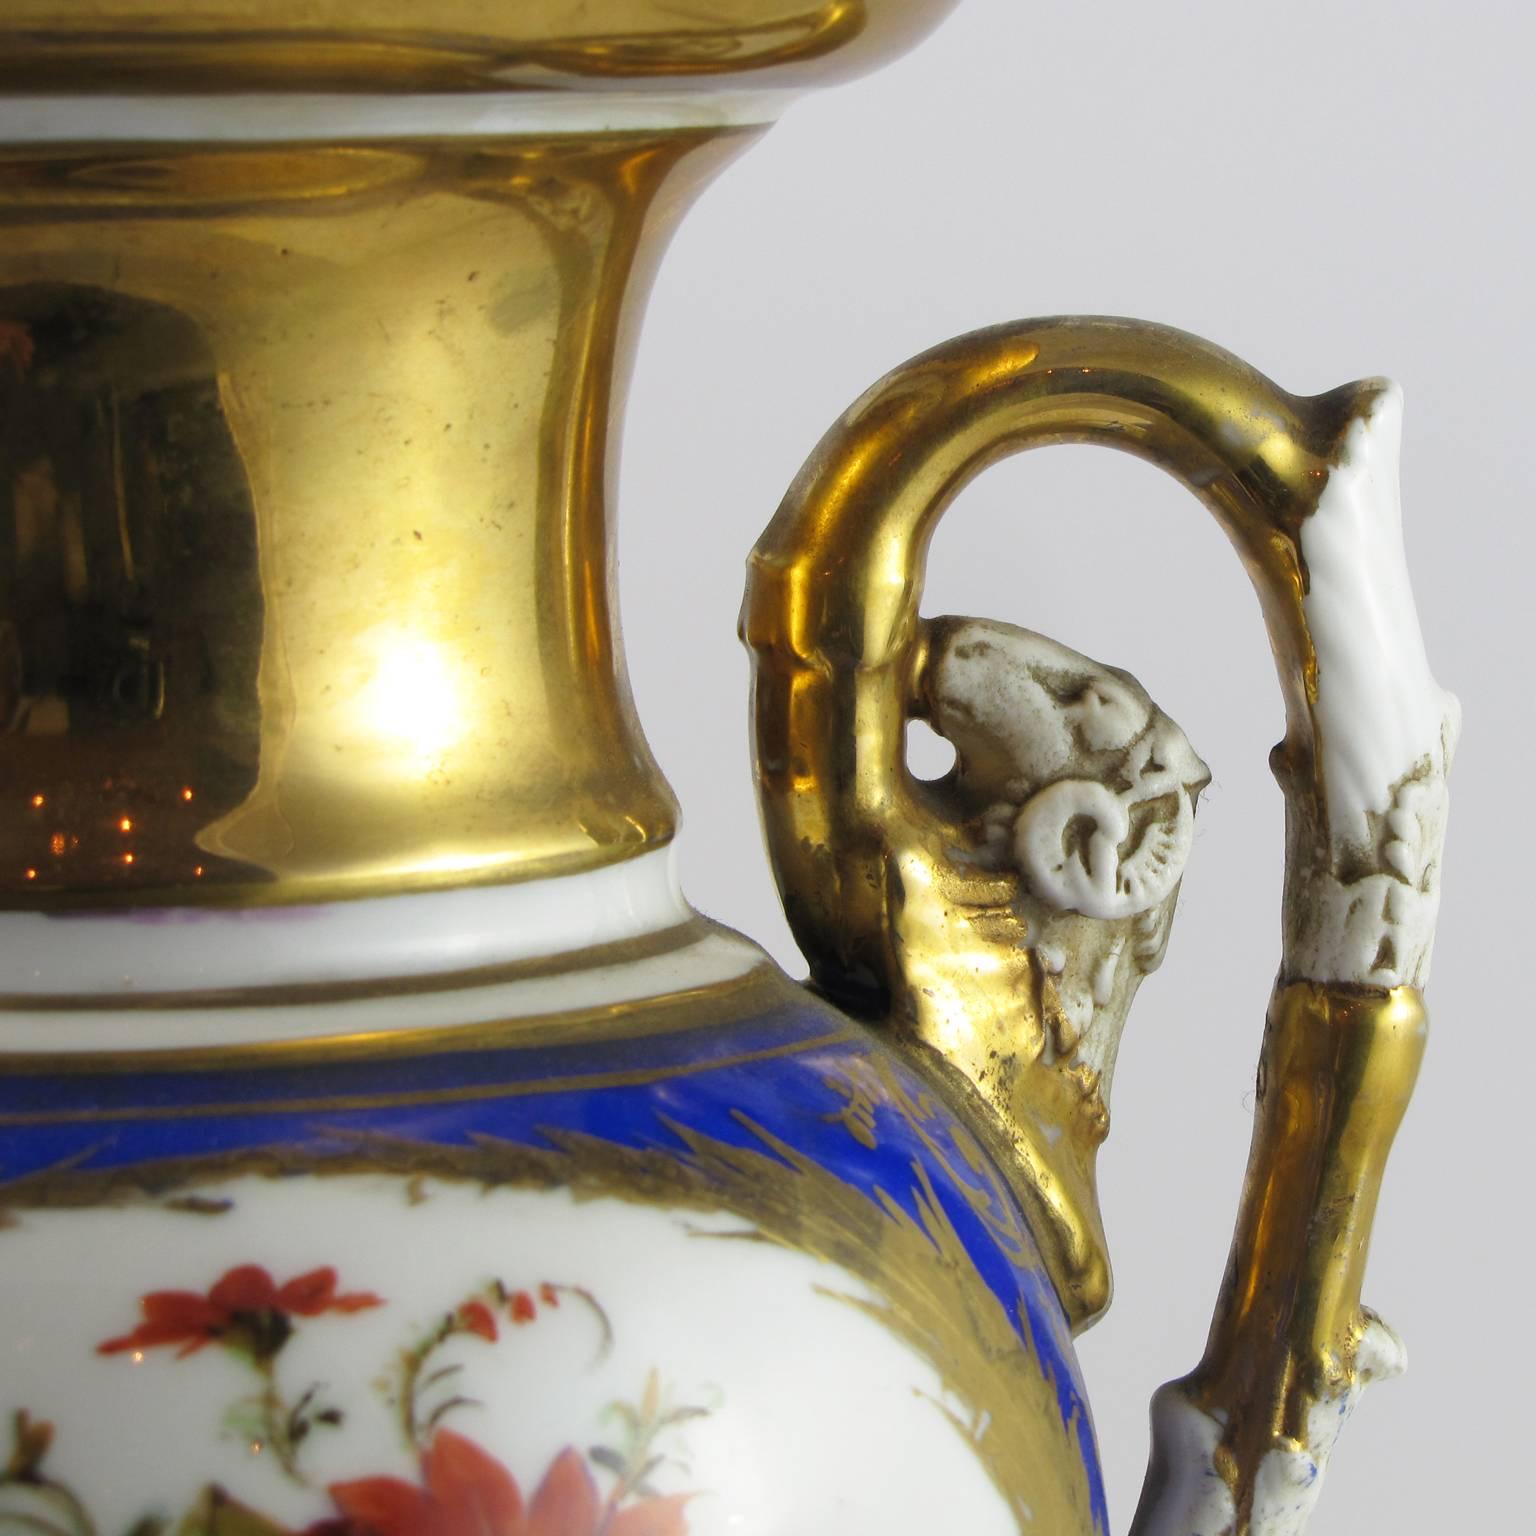 Gilt 19th Century Pair of Parisian Empire Vases in Gilded and Polychrome Porcelain